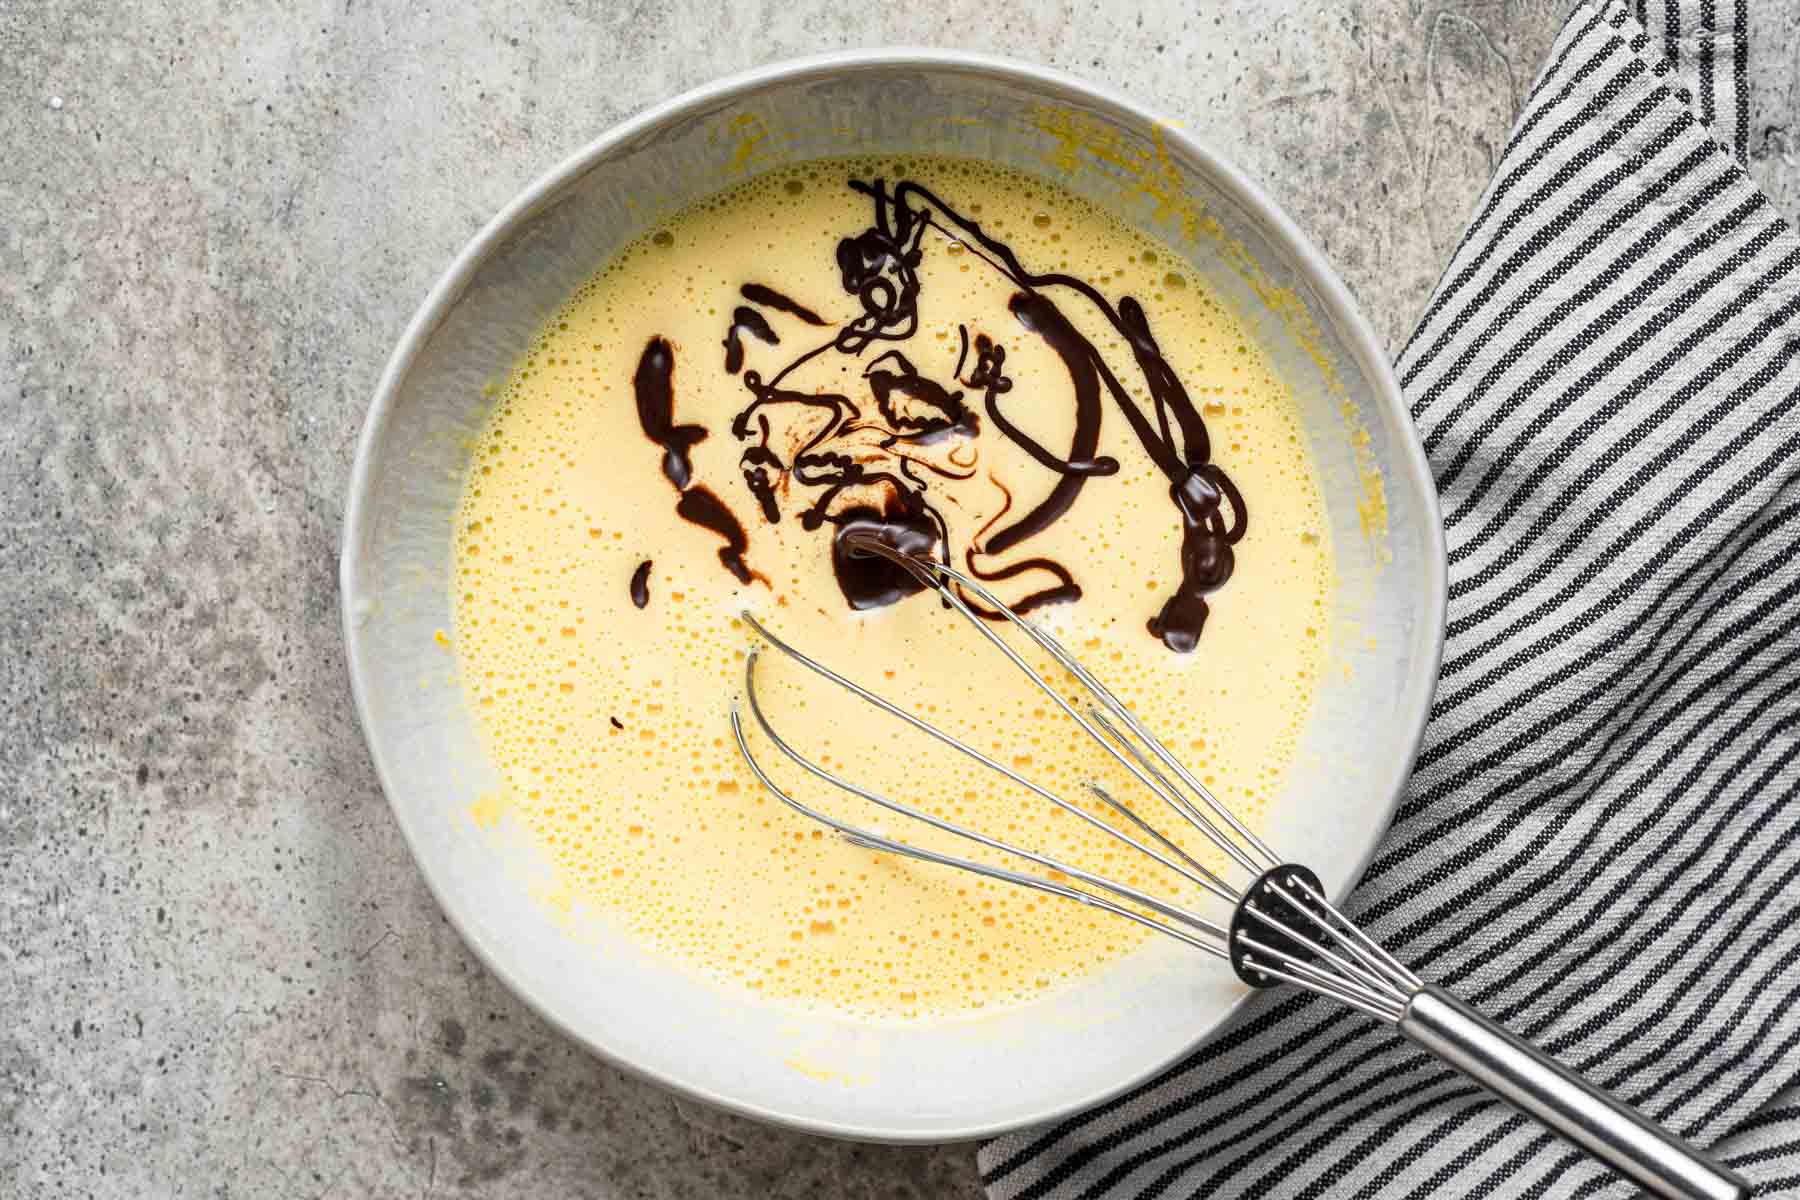 Melted chocolate poured into custard mixture.